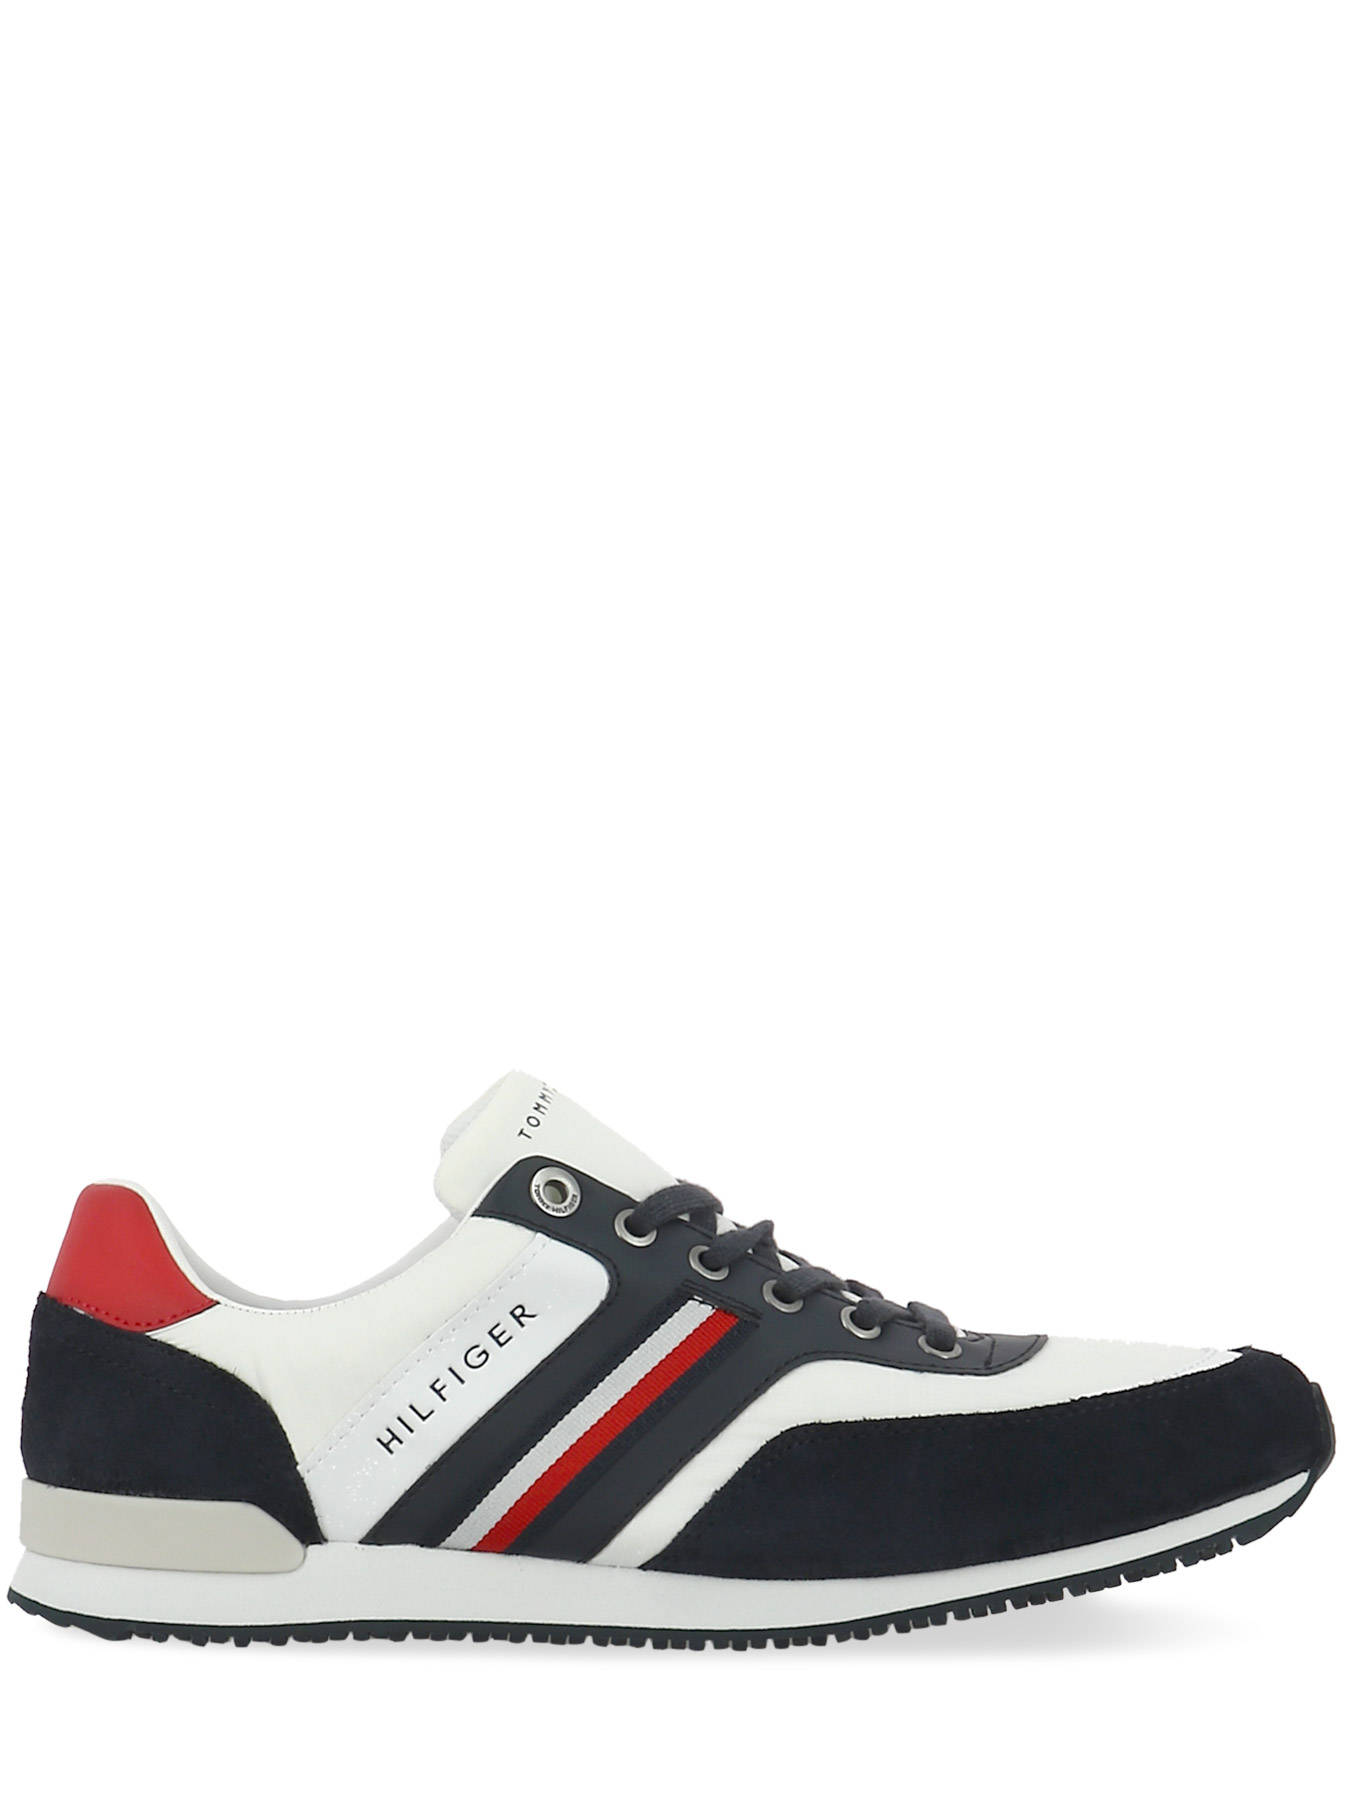 tommy hilfiger iconic sneaker